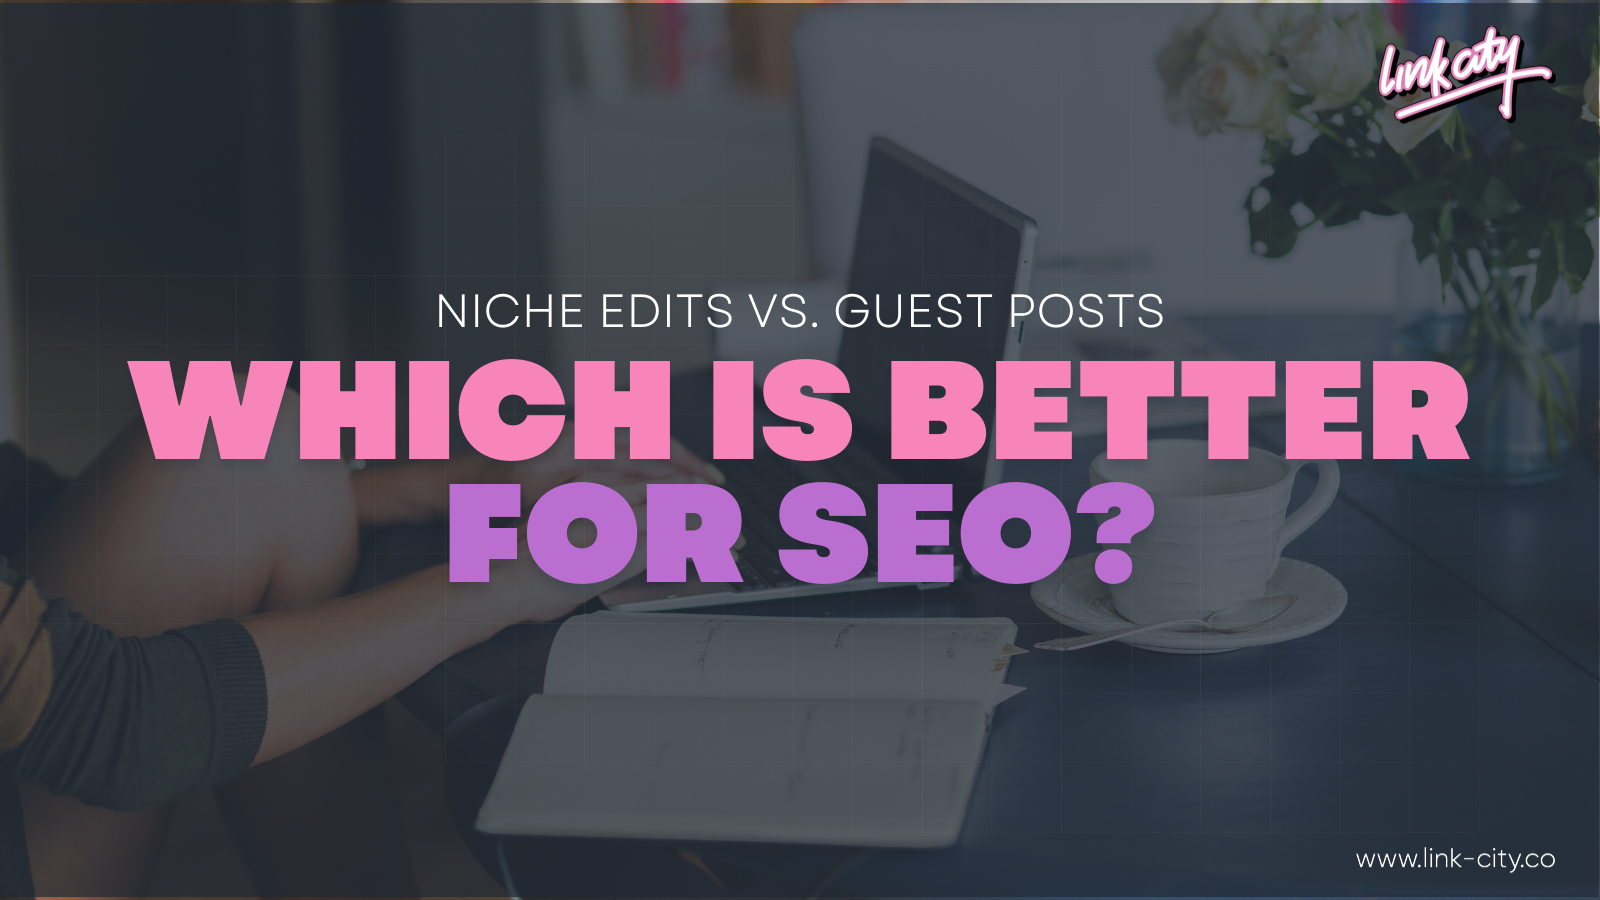 Niche Edits Vs. Guest Posts: Which is Better For SEO?